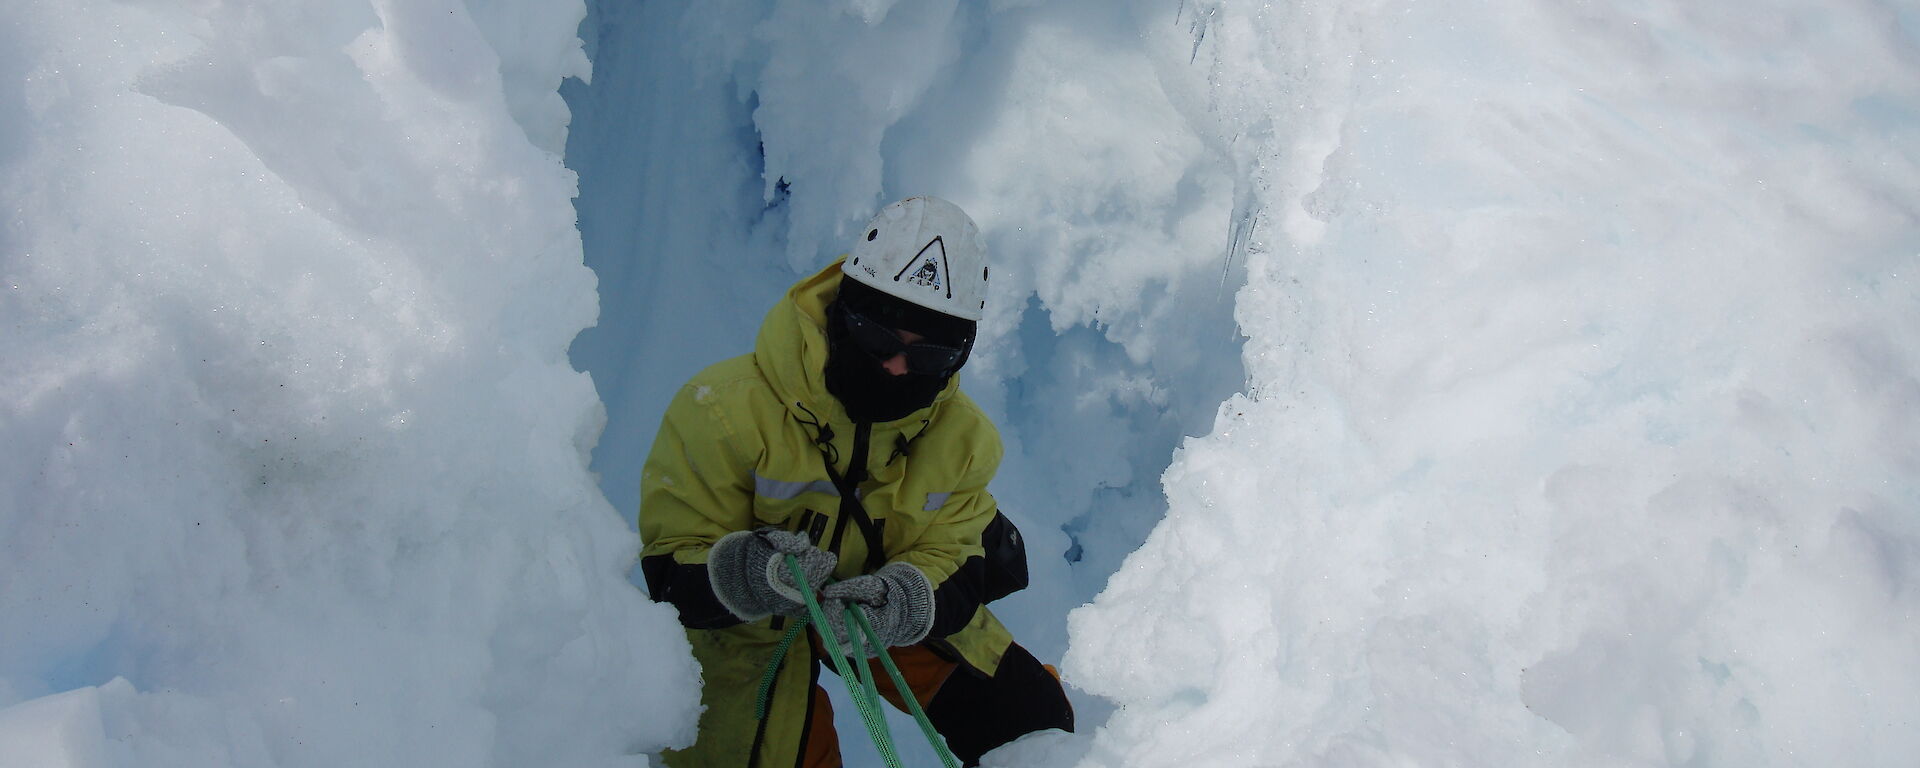 Expeditioner lowered down at a crevasse during field training near Mawson.